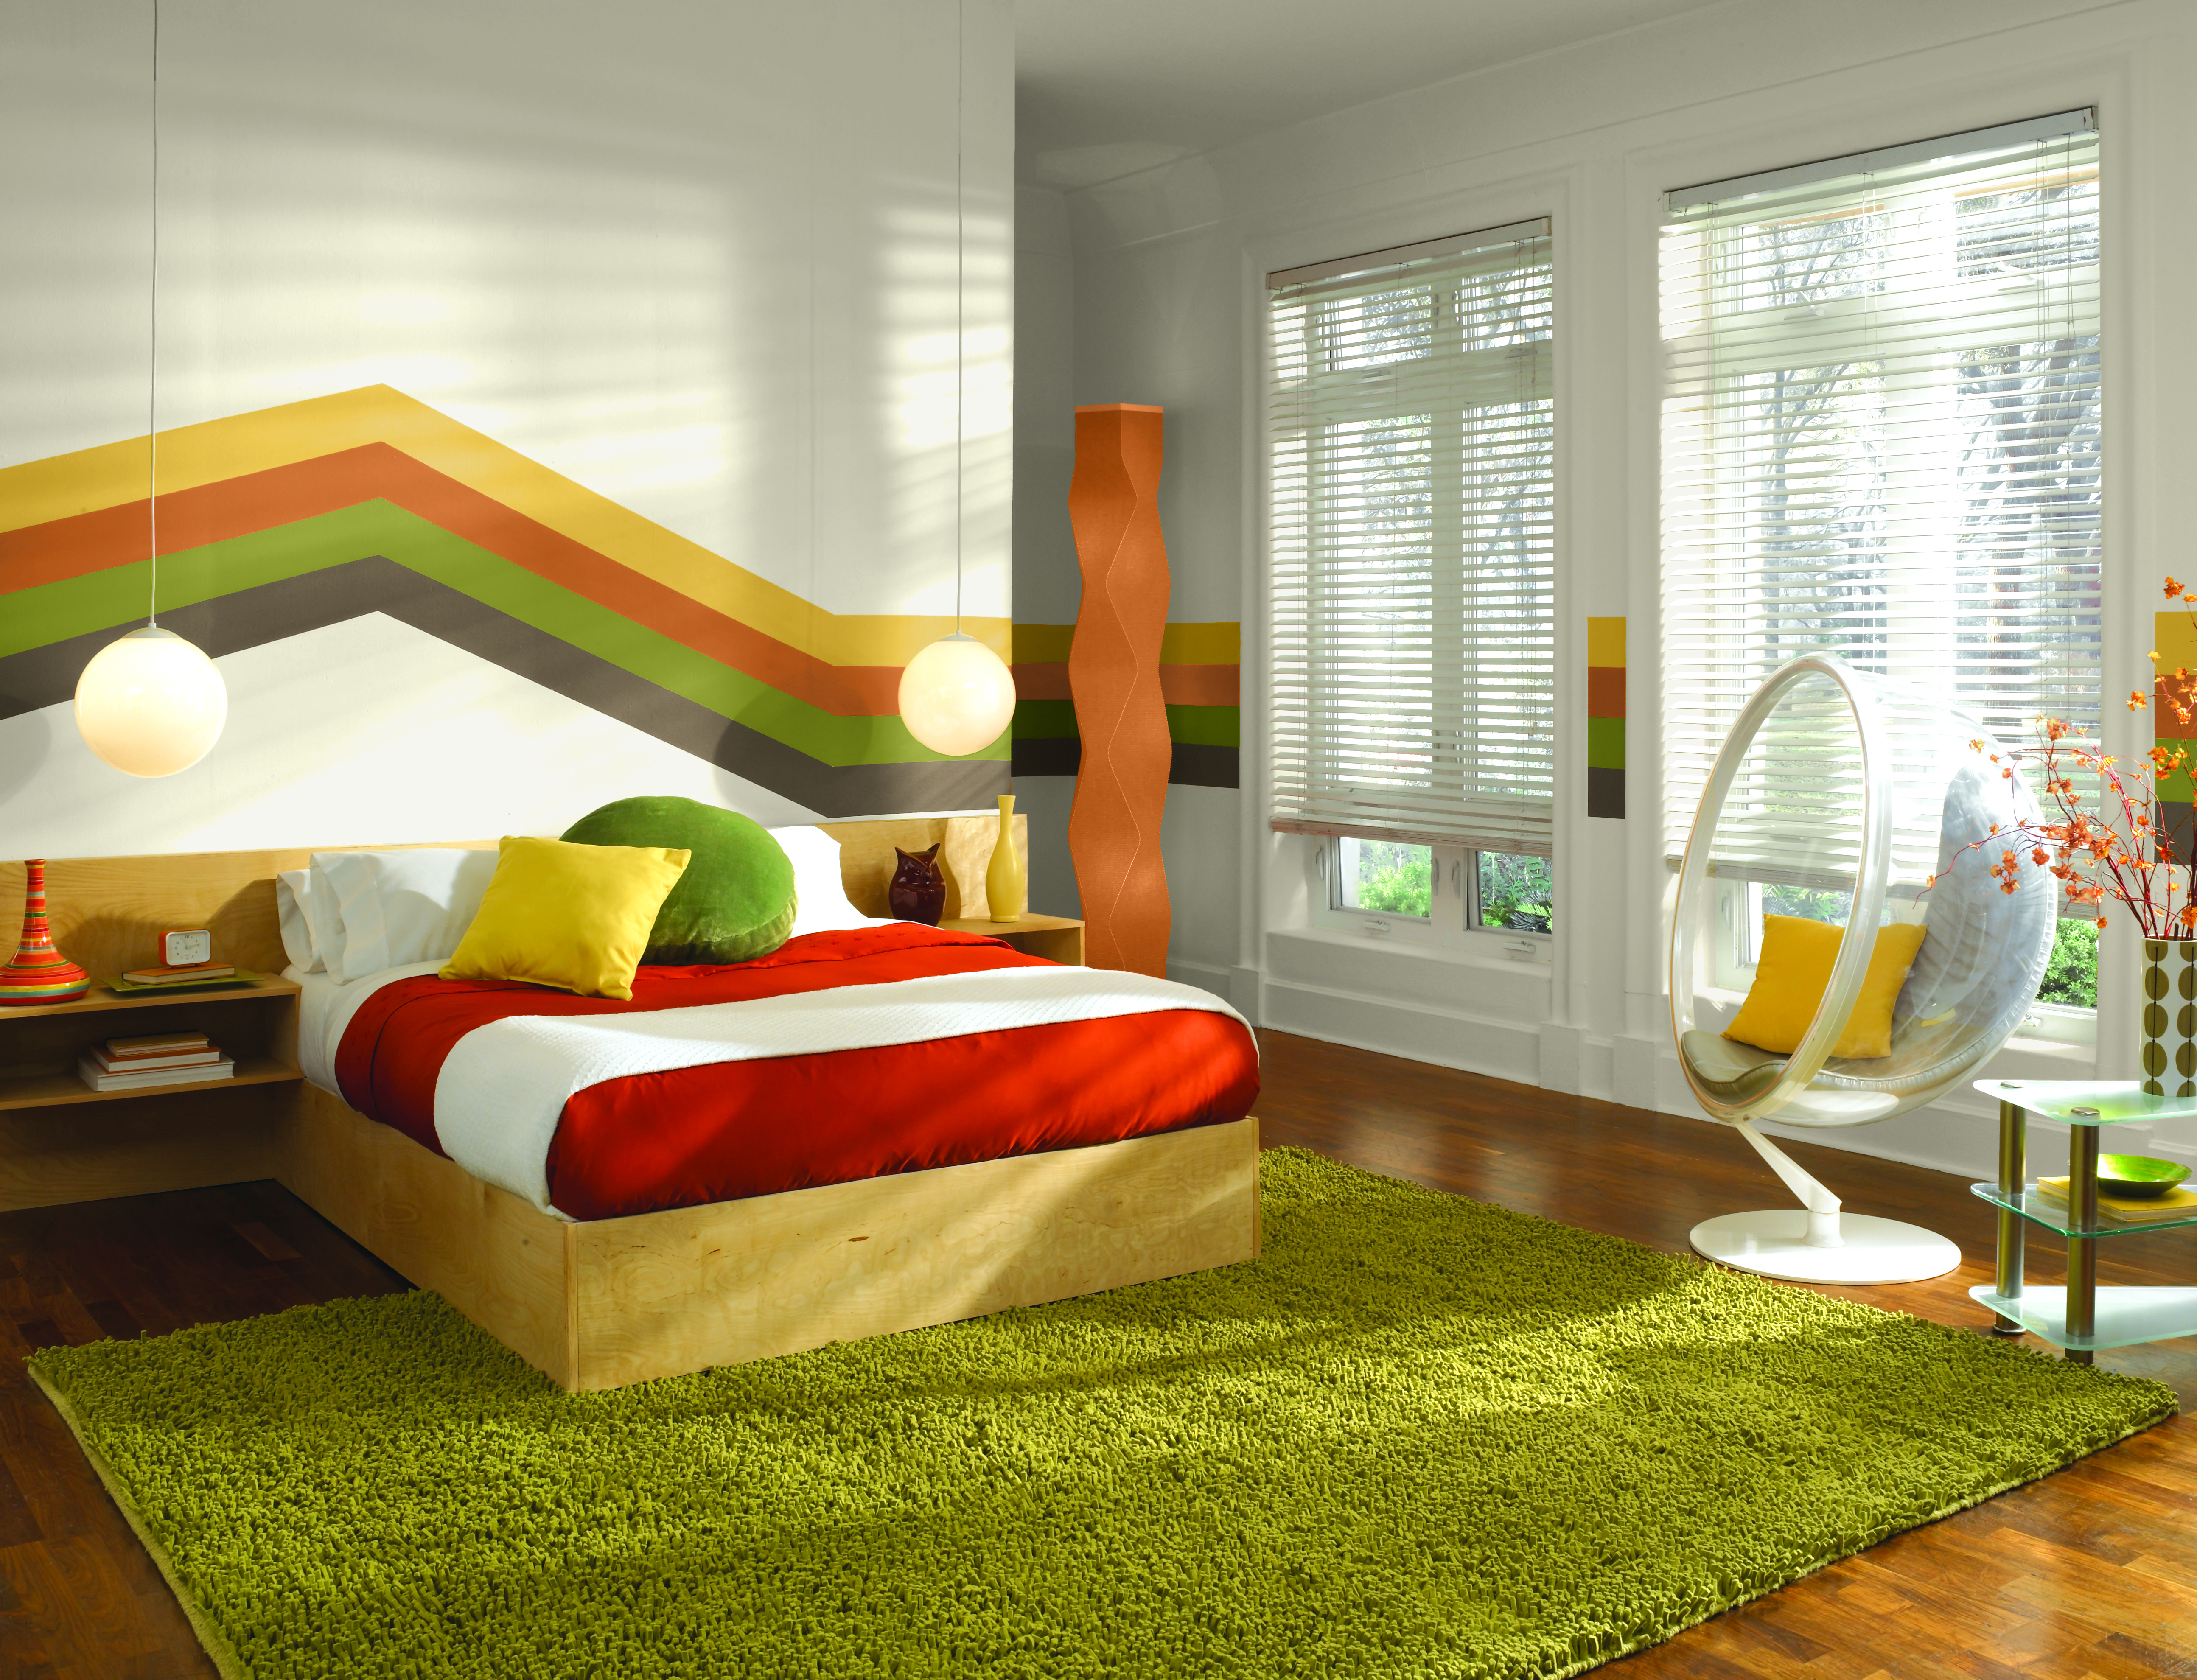 Retro-inspired bedroom with a colourful rainbow stripe design on the wall